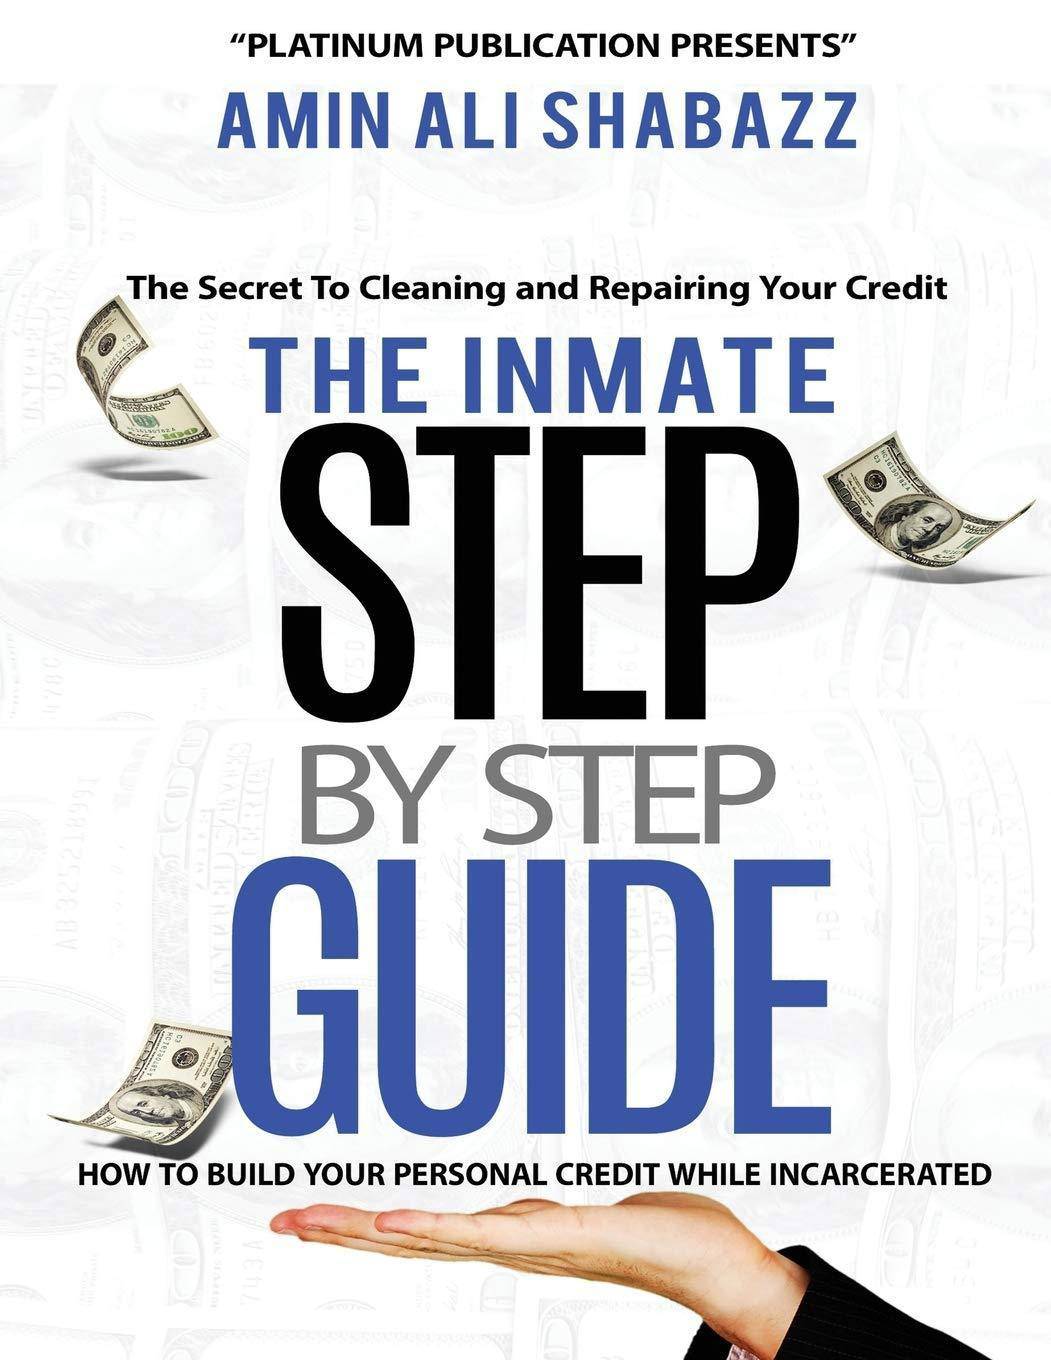 The Inmate Step By Step Guide How To Build Your Presonal Credit - SureShot Books Publishing LLC